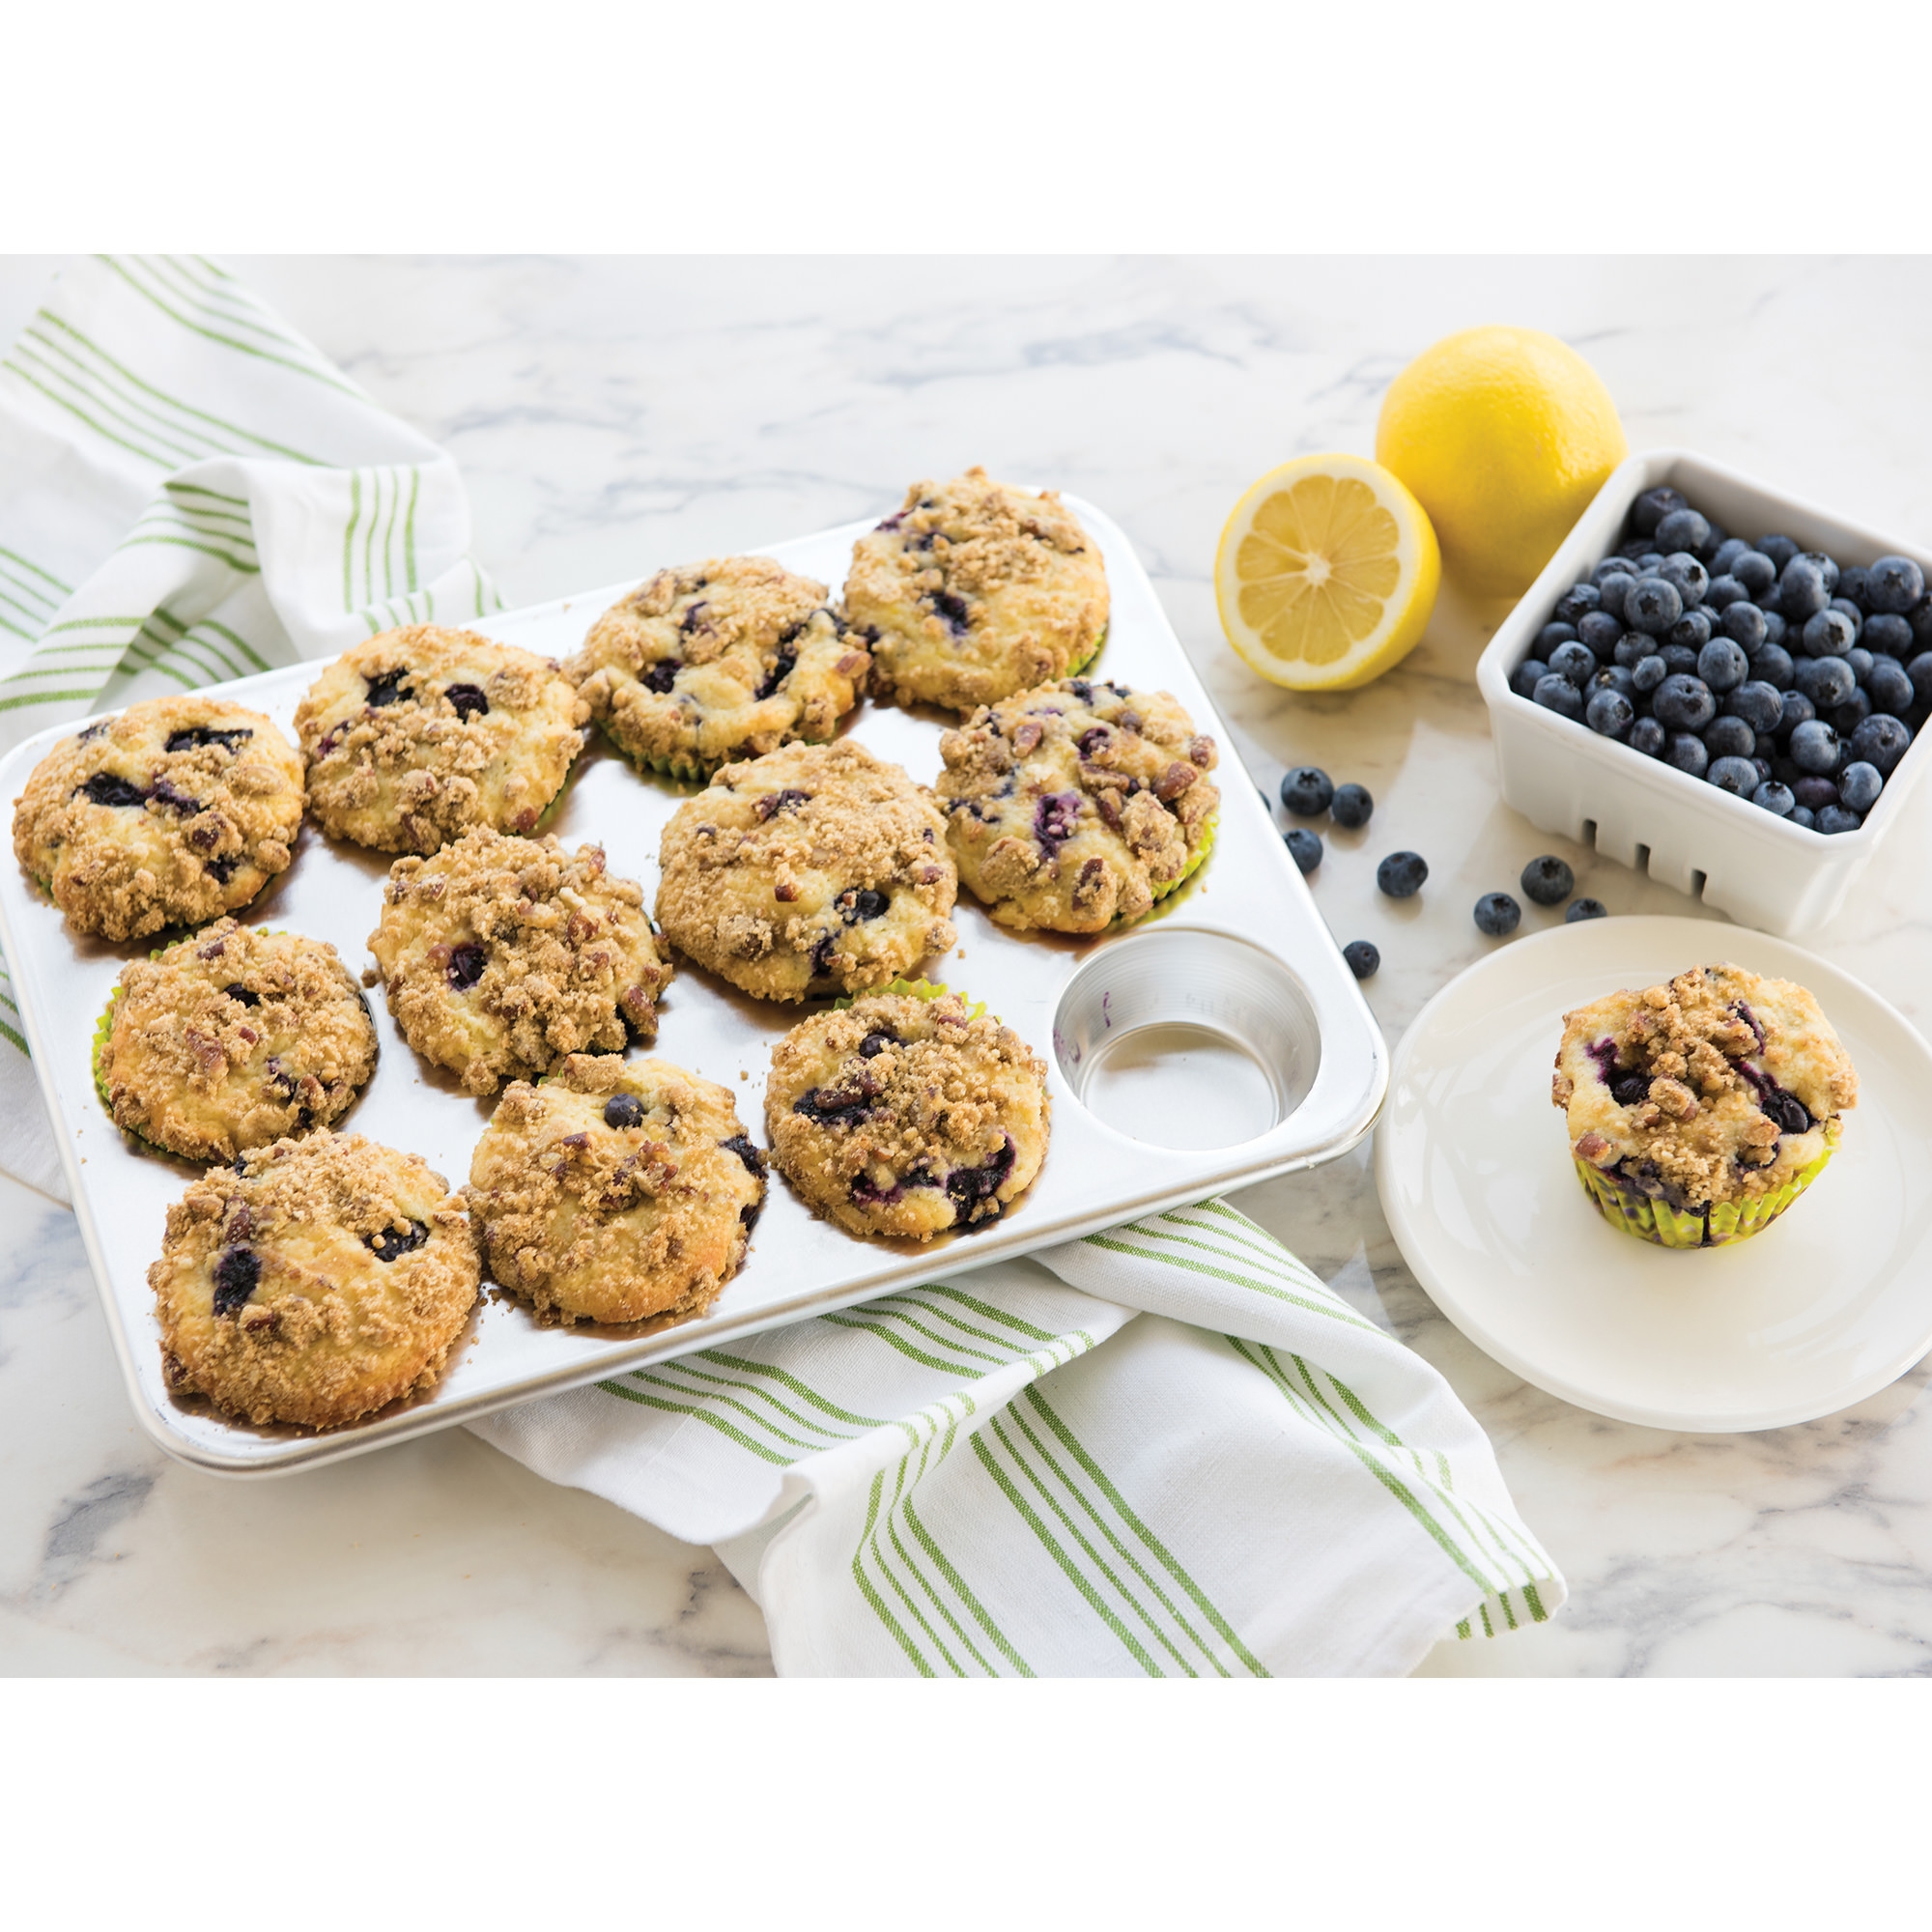 Nordic Ware Naturals Muffin Pan 12 Cup Image 2